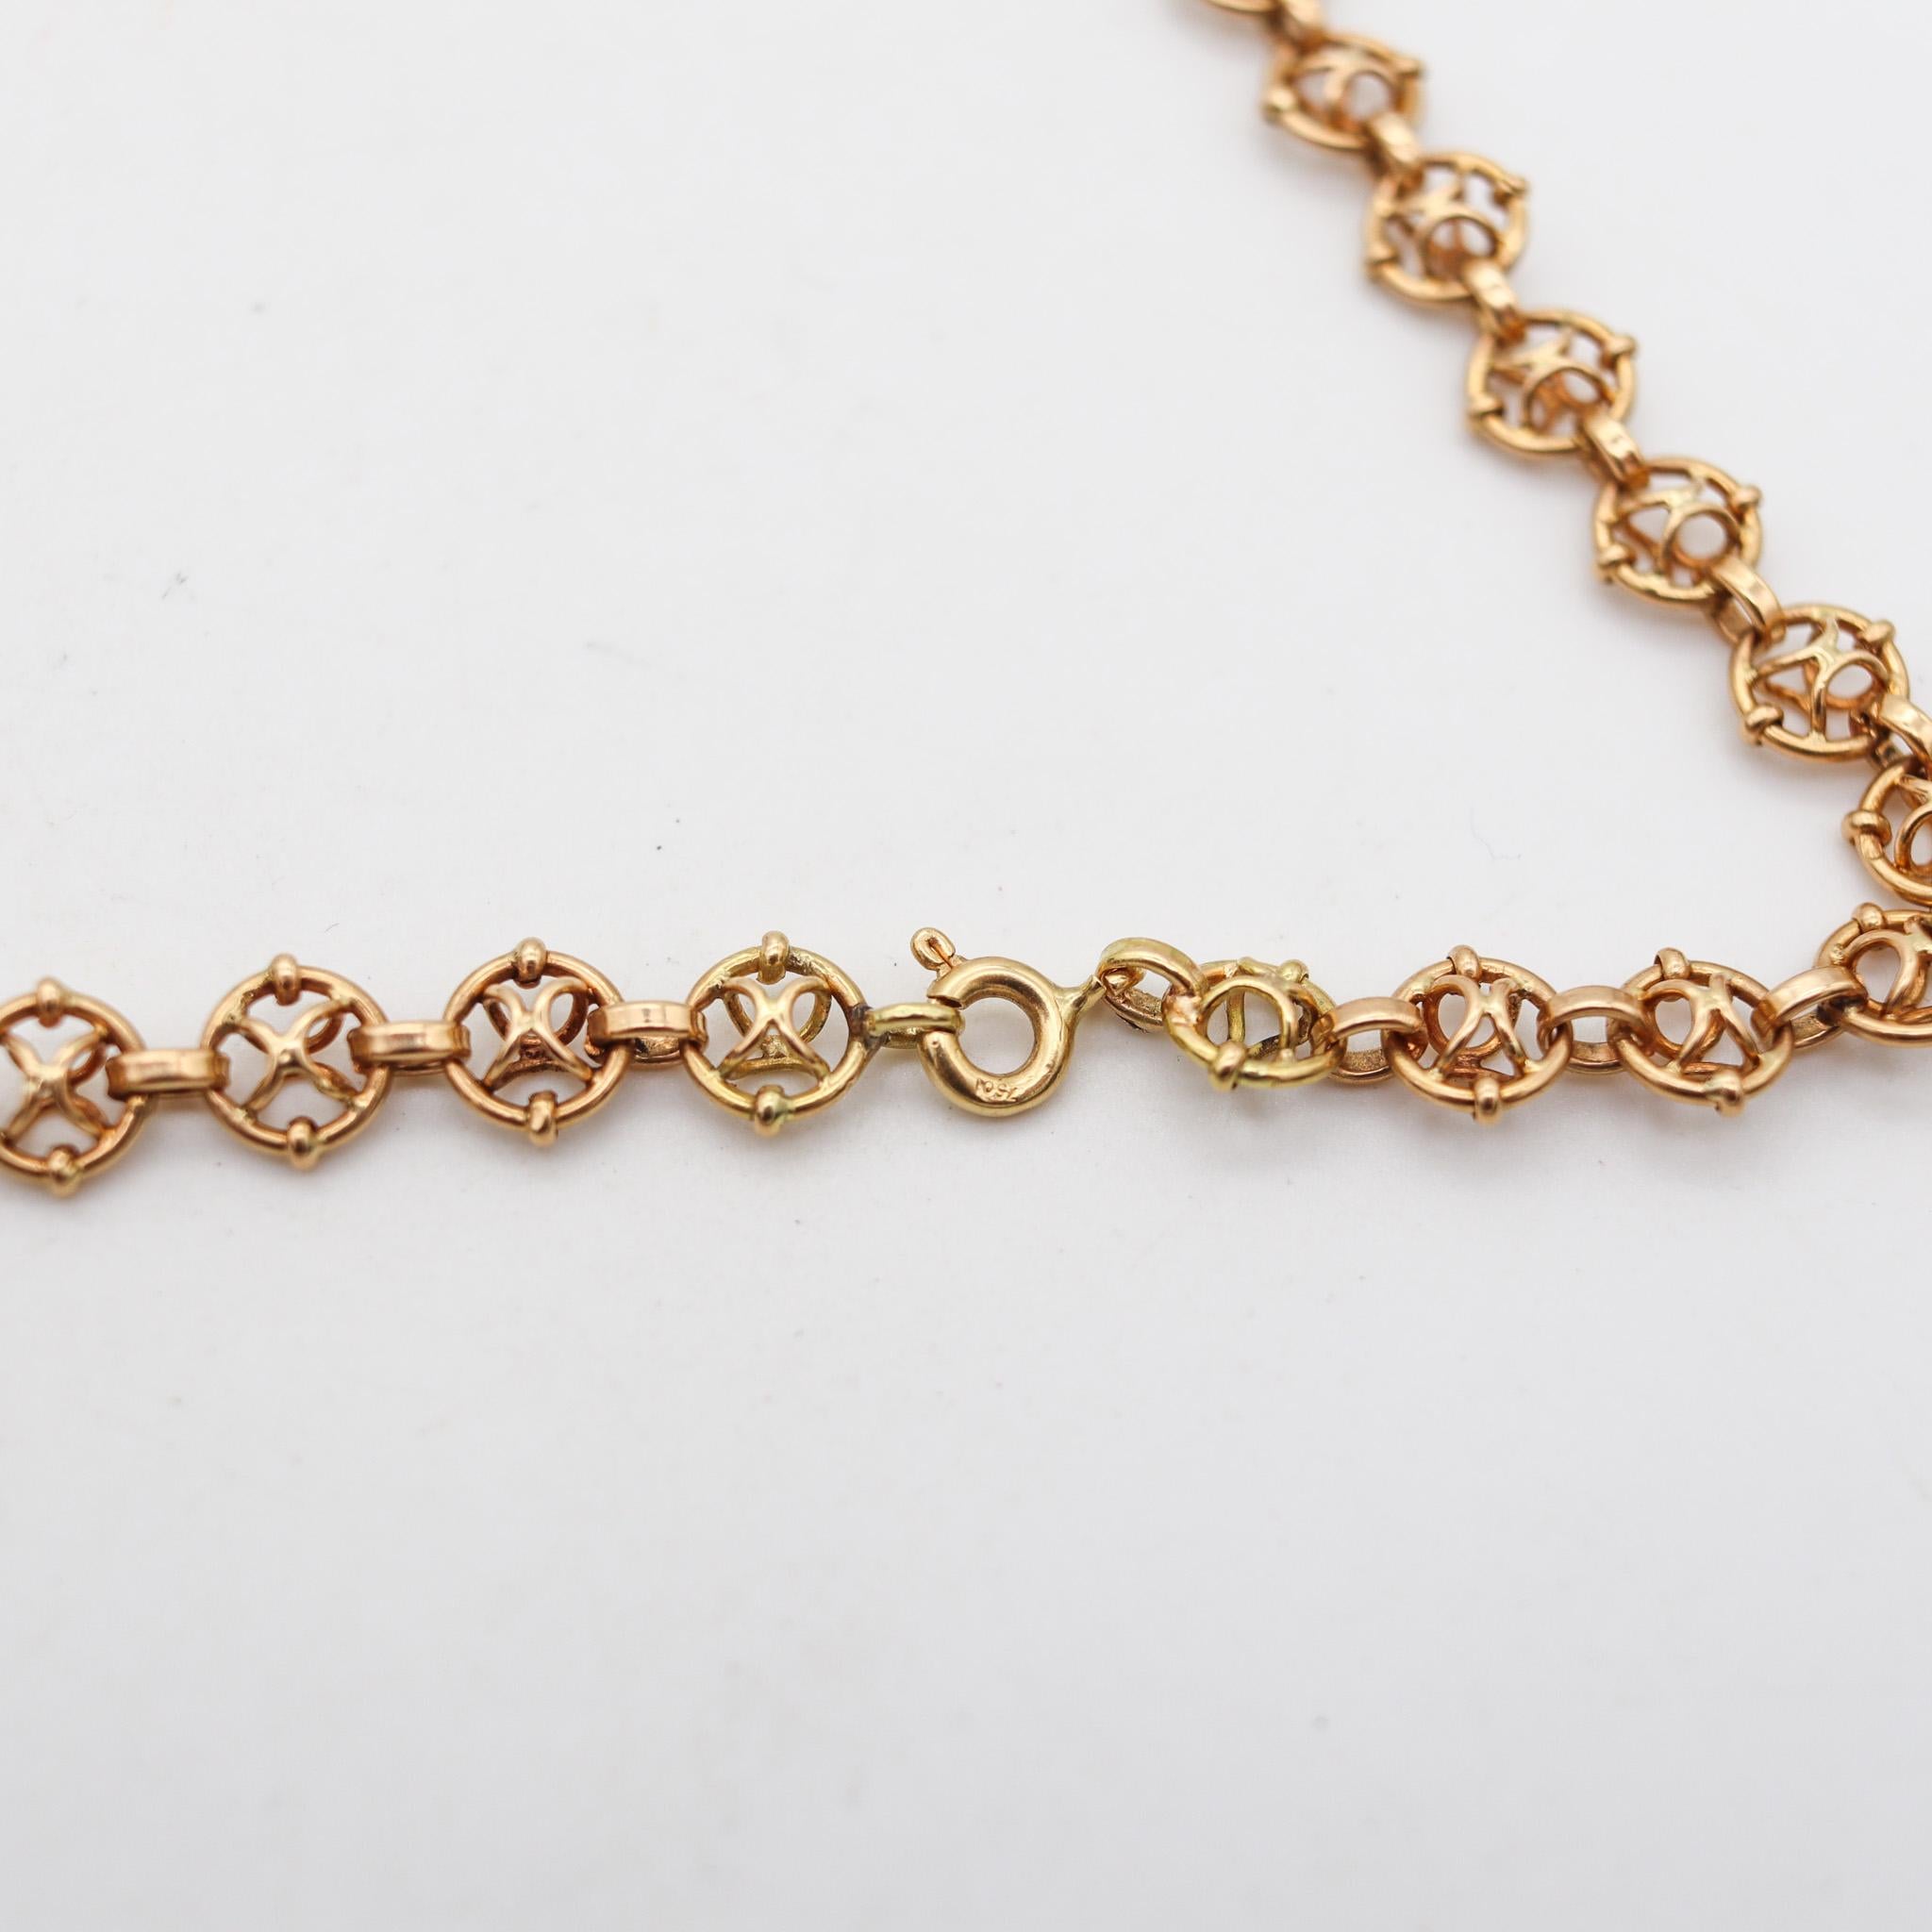 A French long necklace chain.

Very handsome and useful long chain, made in France during the art deco period, back in the 1920. The links of this chain are designed in three dimensions with geometric patters. The chain is composed by one